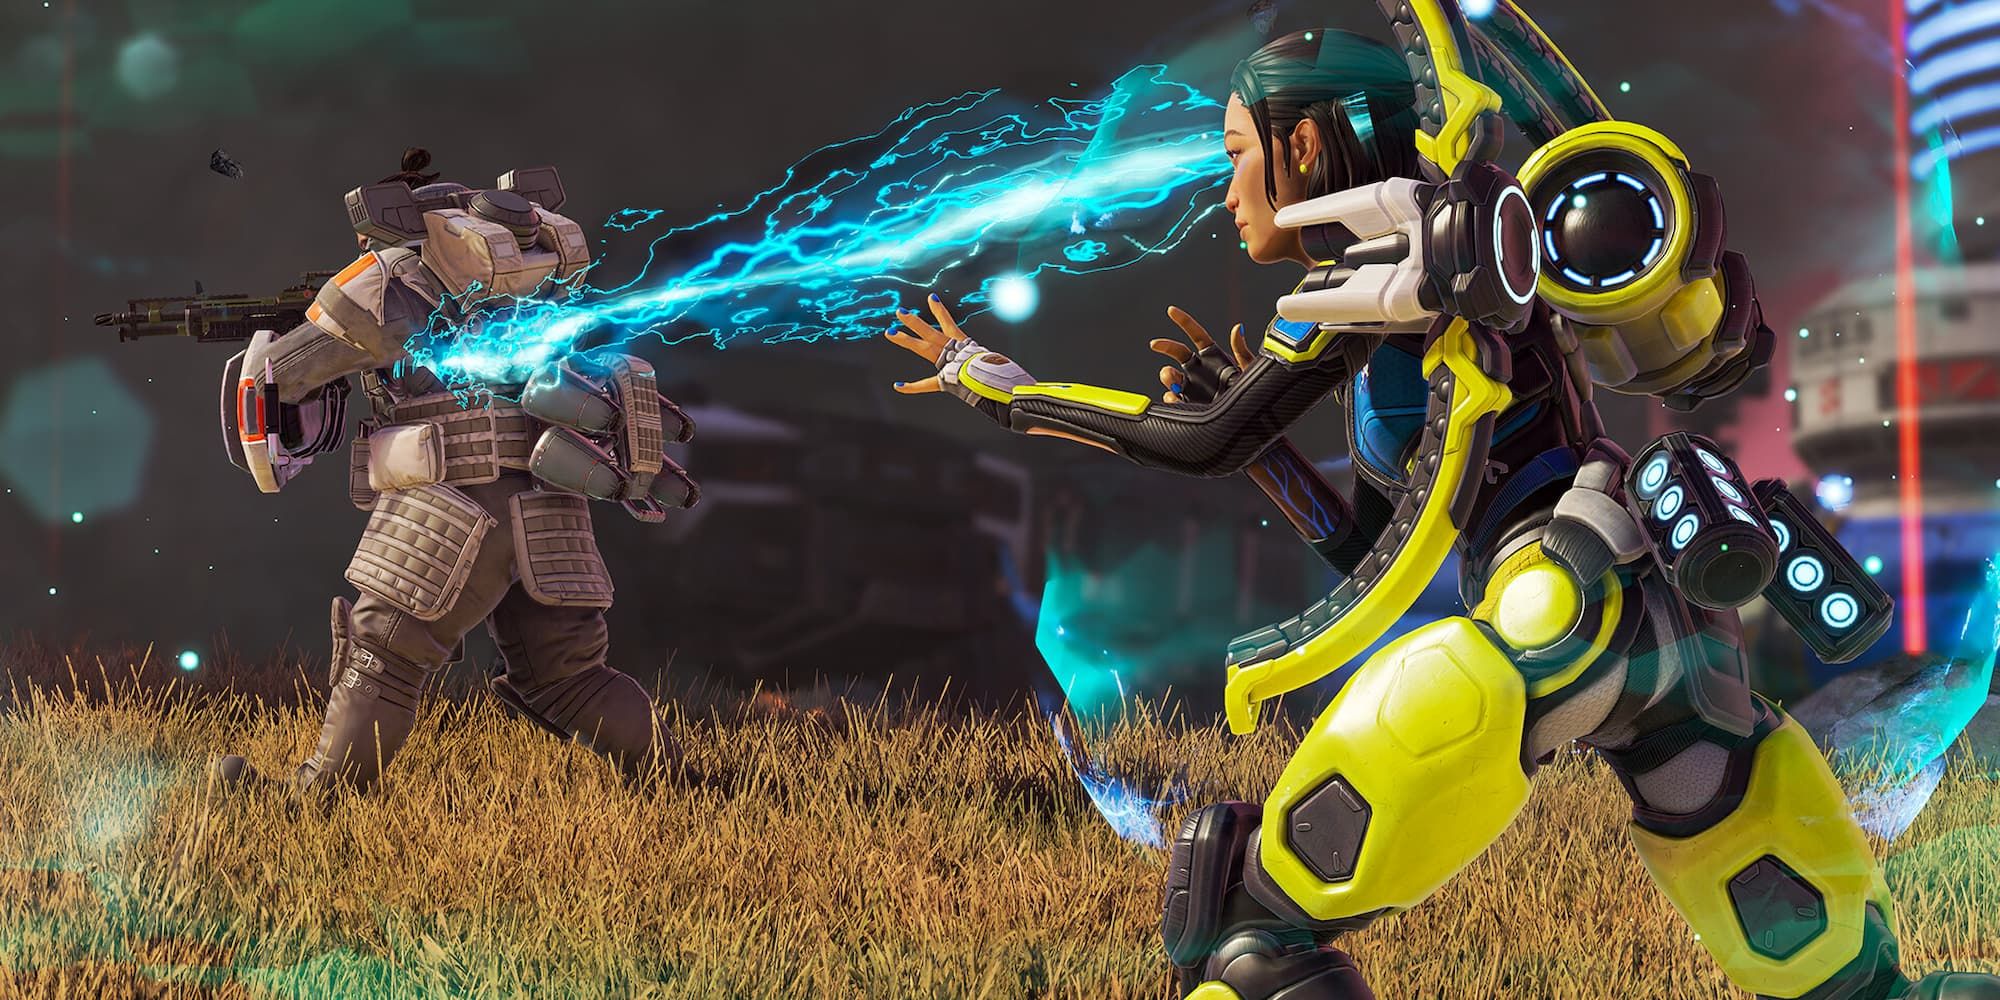 Cross Progression is now enabled in Apex Legends